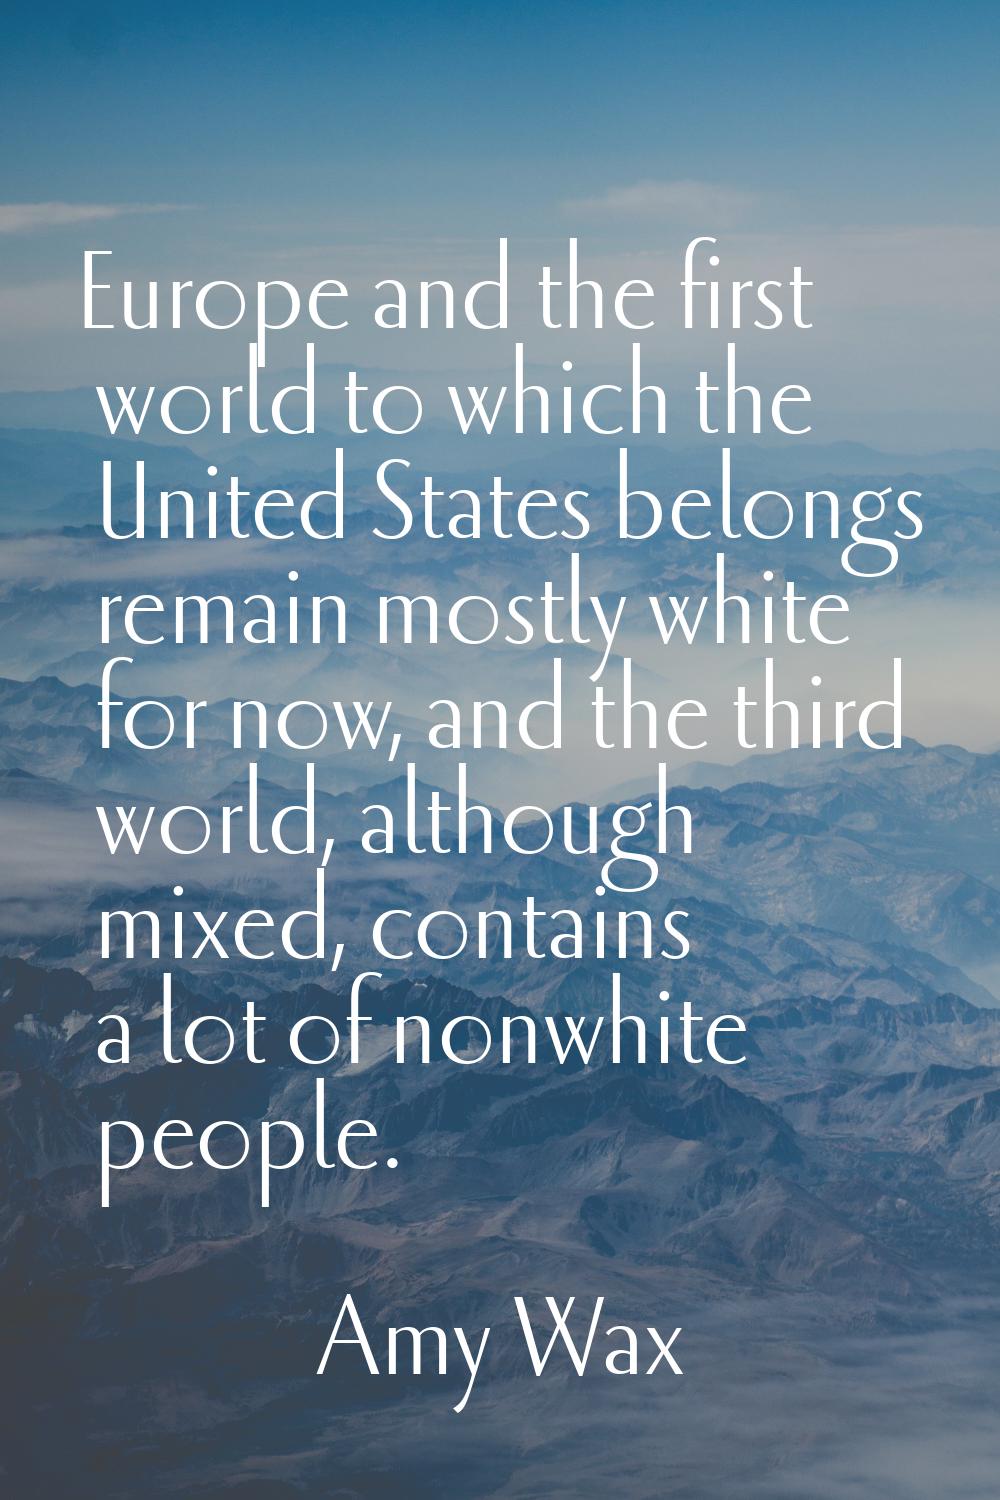 Europe and the first world to which the United States belongs remain mostly white for now, and the 